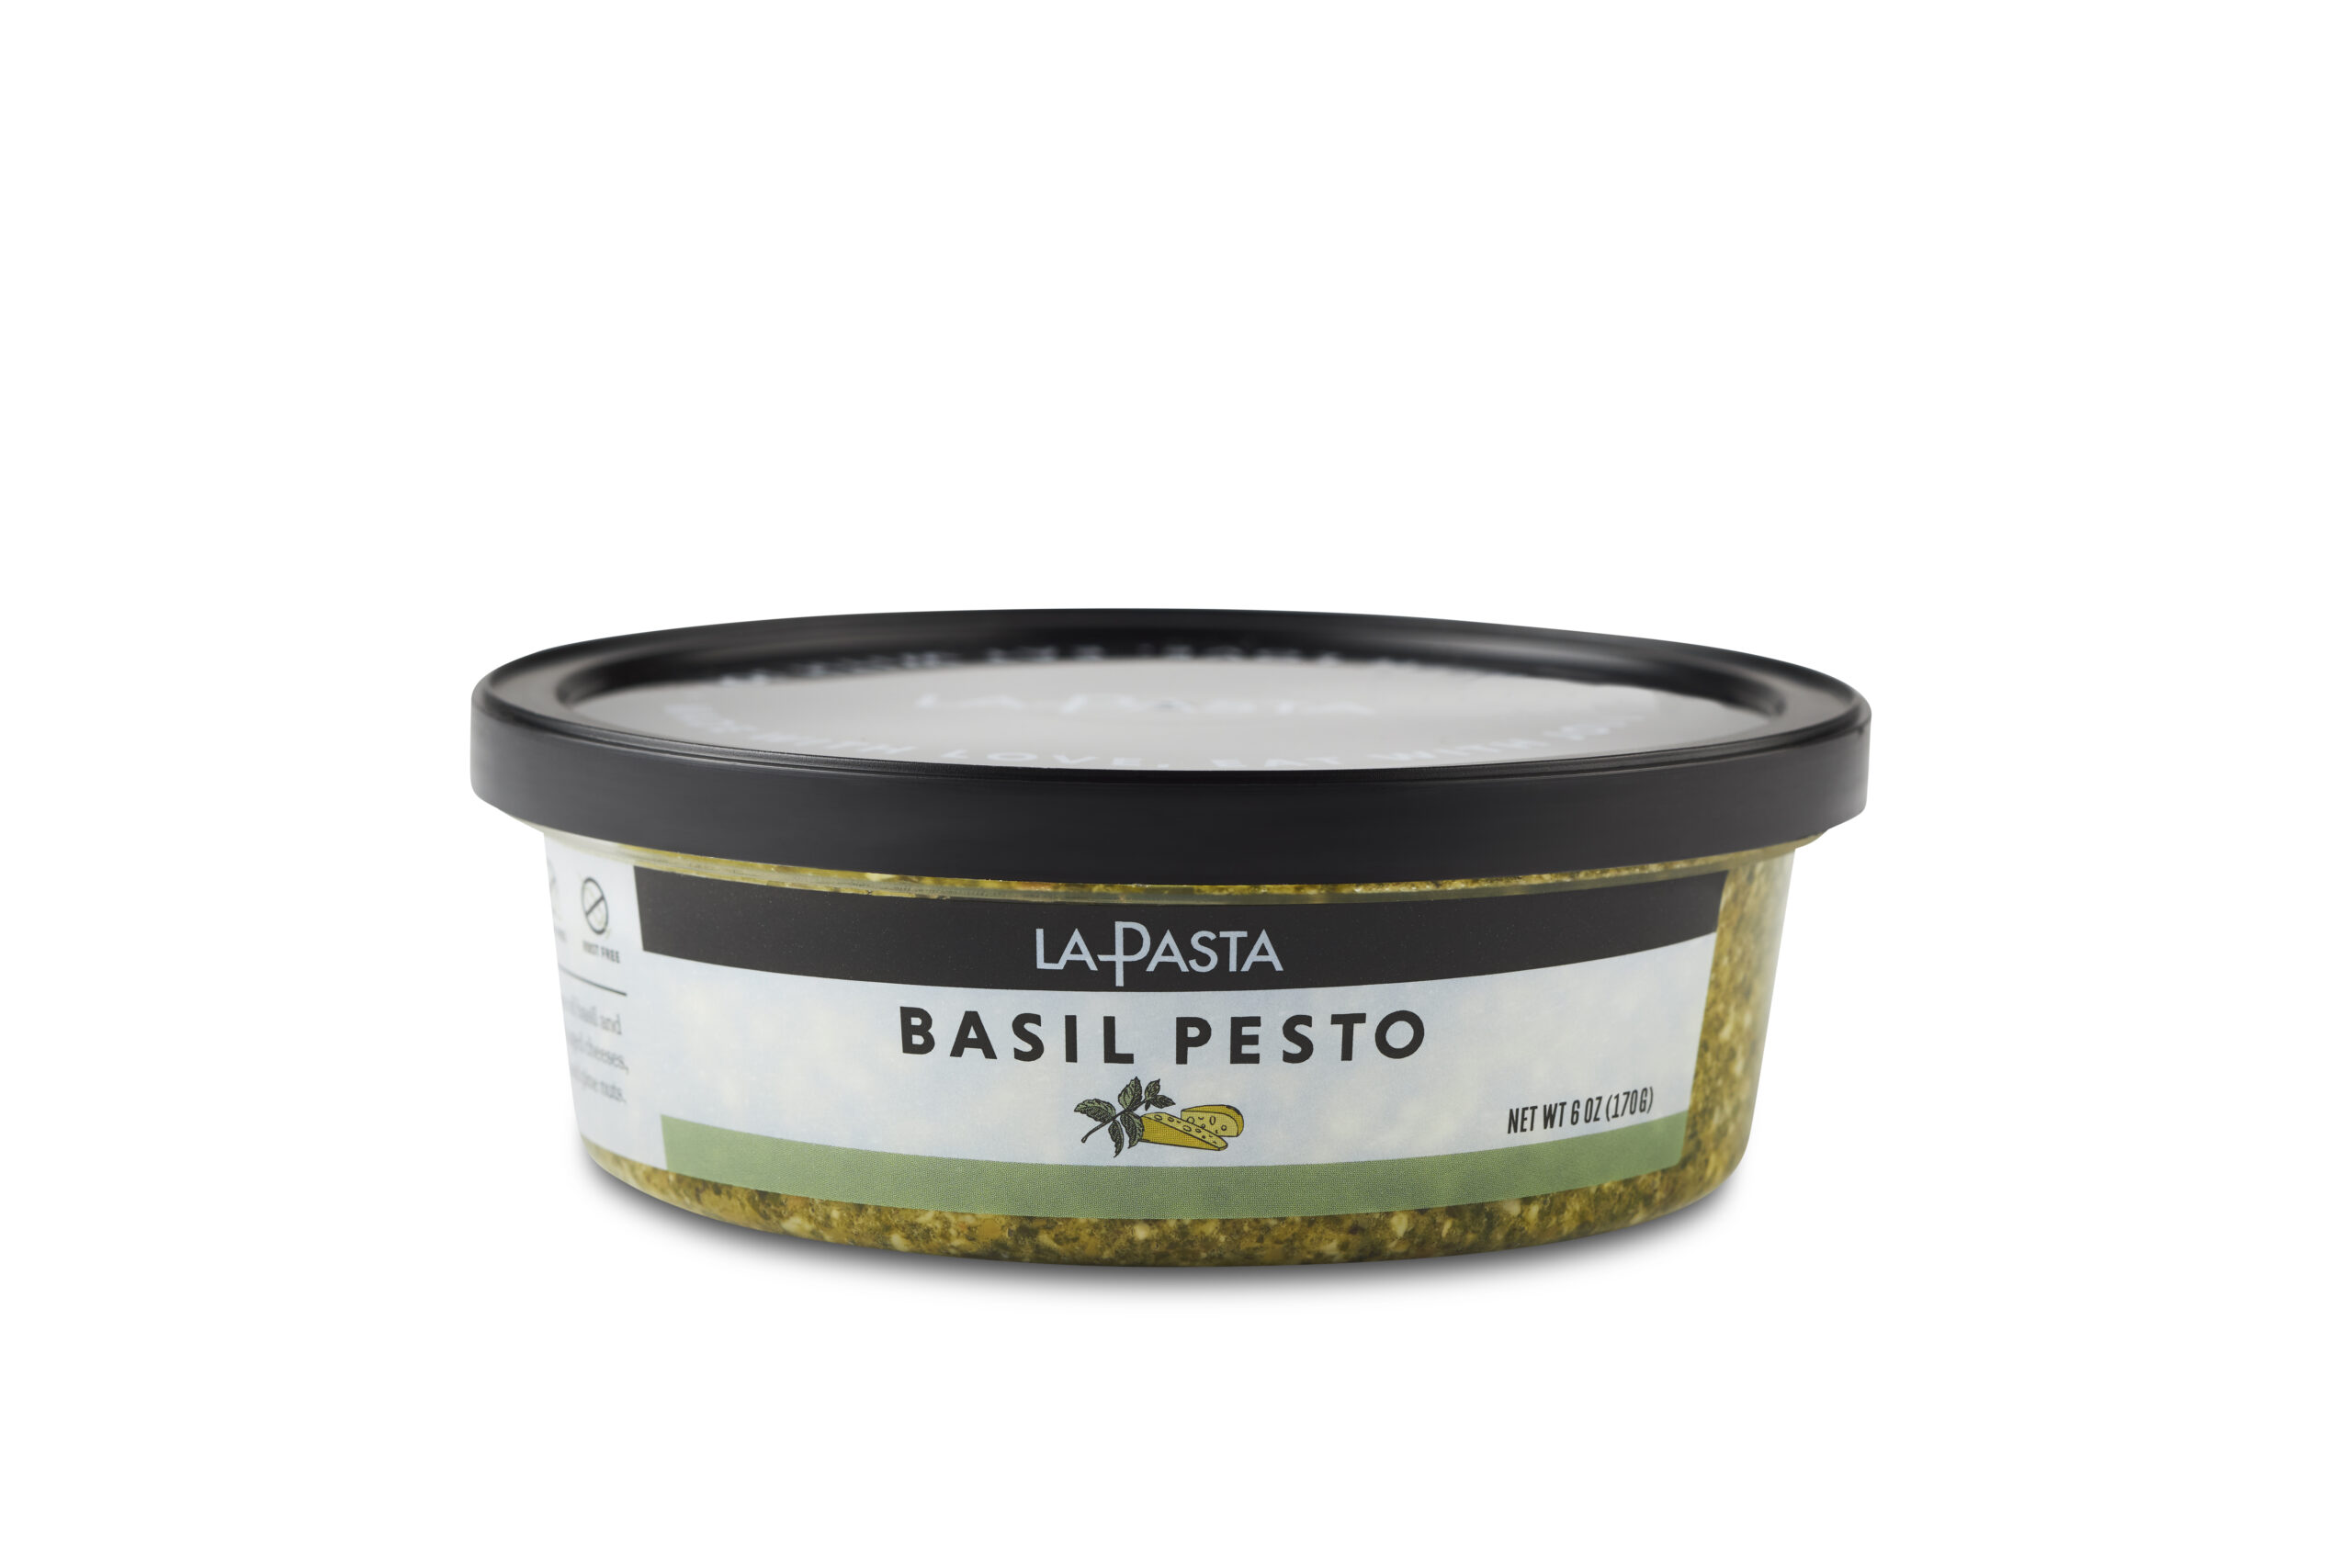 A container of basil pesto is shown.